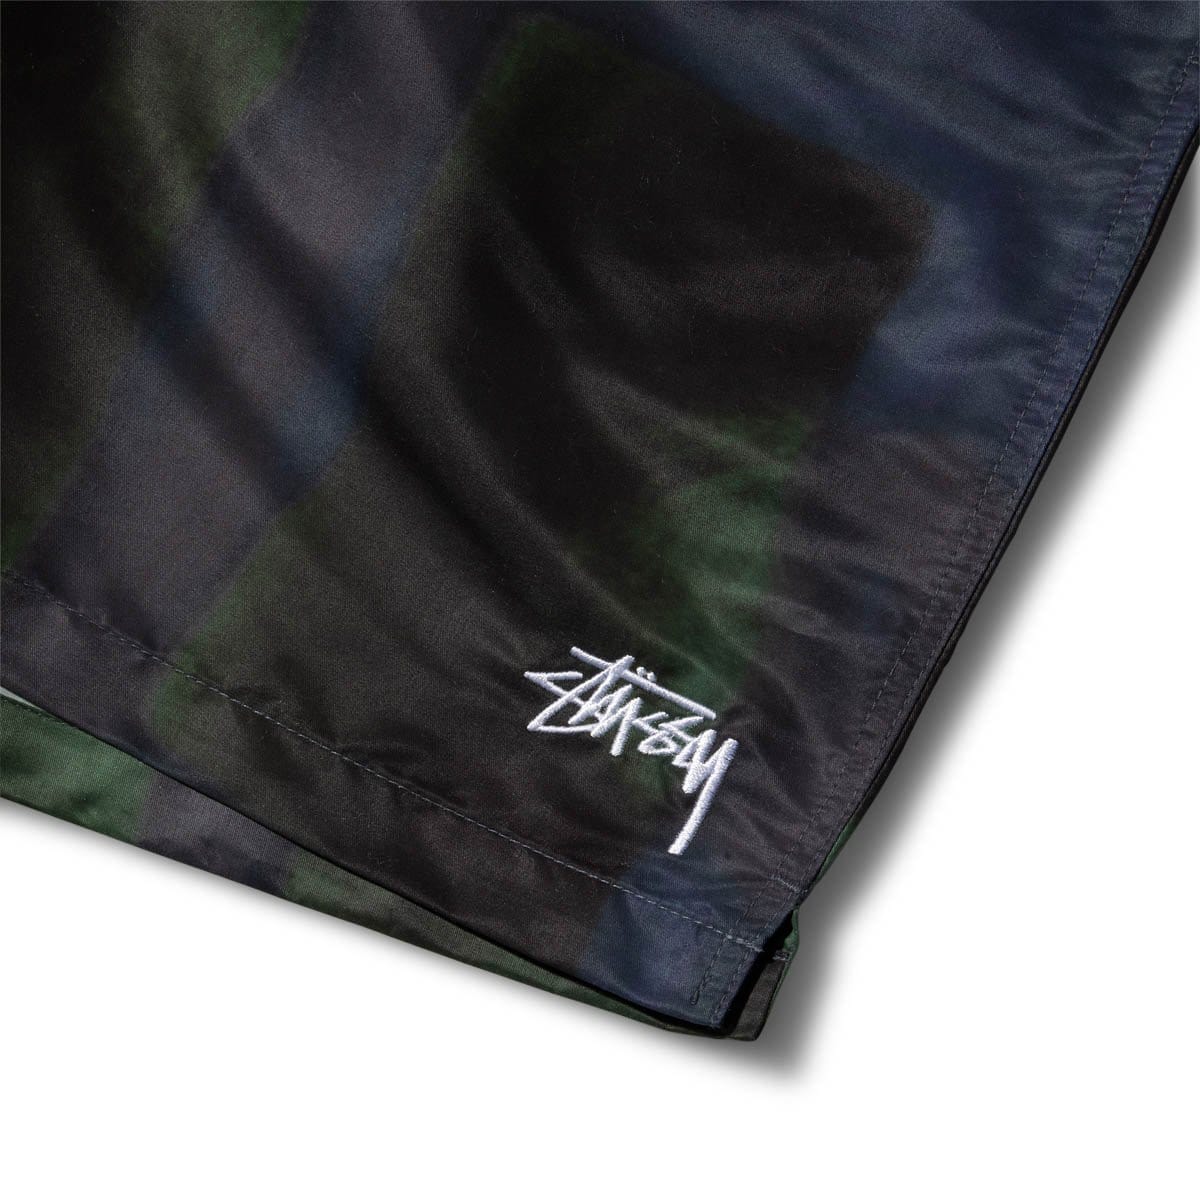 Stüssy Bottoms DYED PLAID WATER SHORT